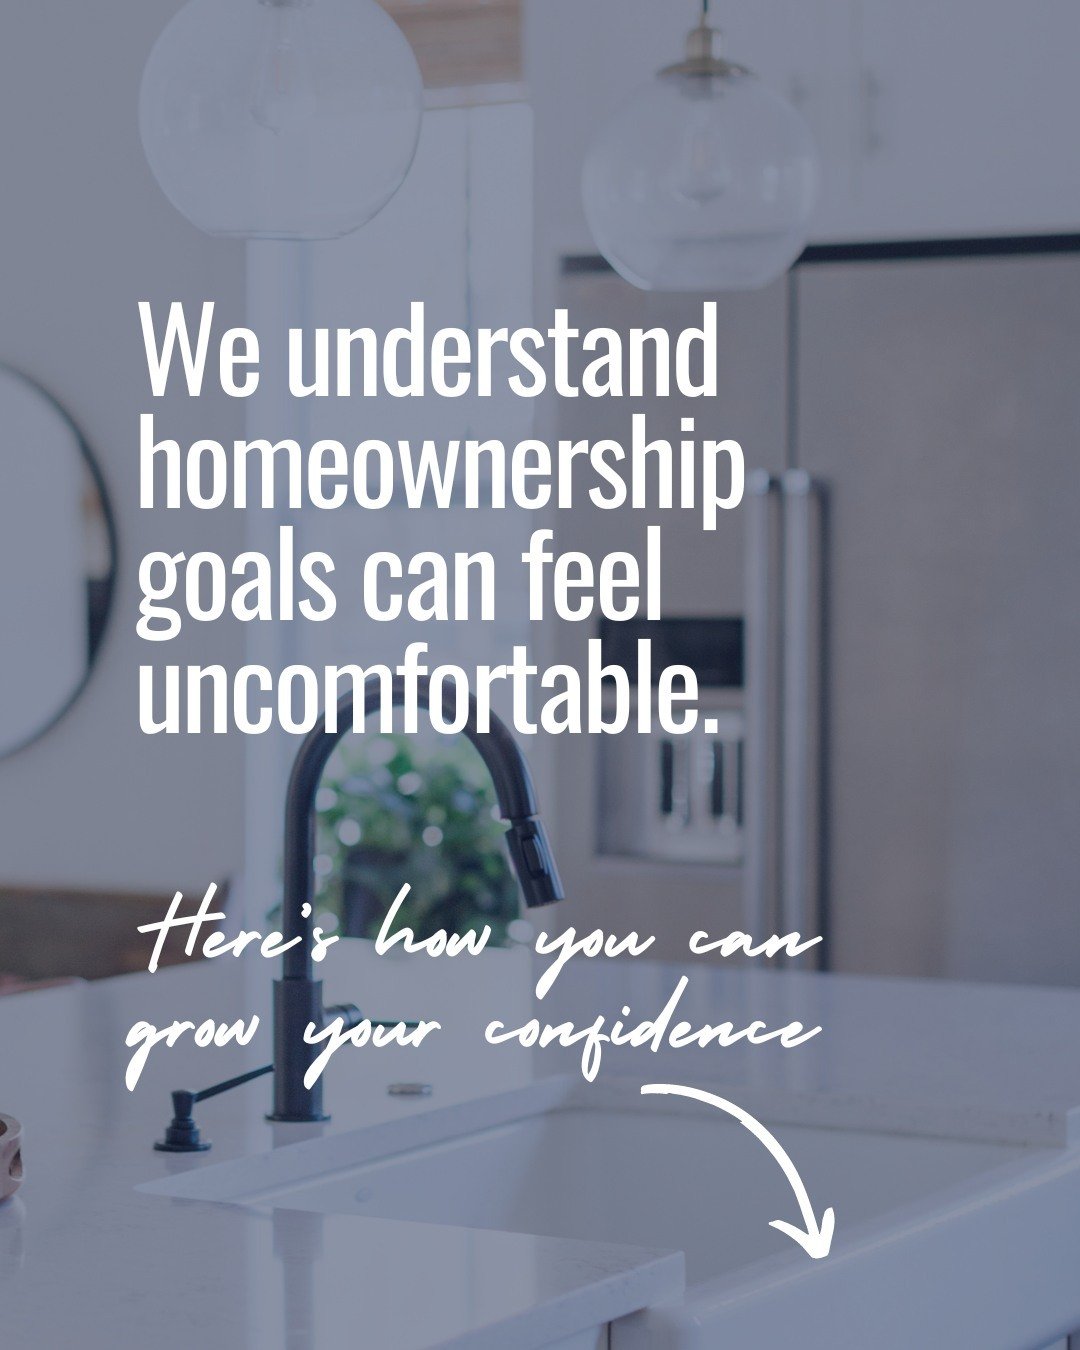 The road to homeownership can be a daunting one, but we're here to boost your confidence throughout the process. Check out our top tips to jumpstart your journey:

Empower Yourself: Knowledge is key! Dedicate time to educate yourself about the ins an